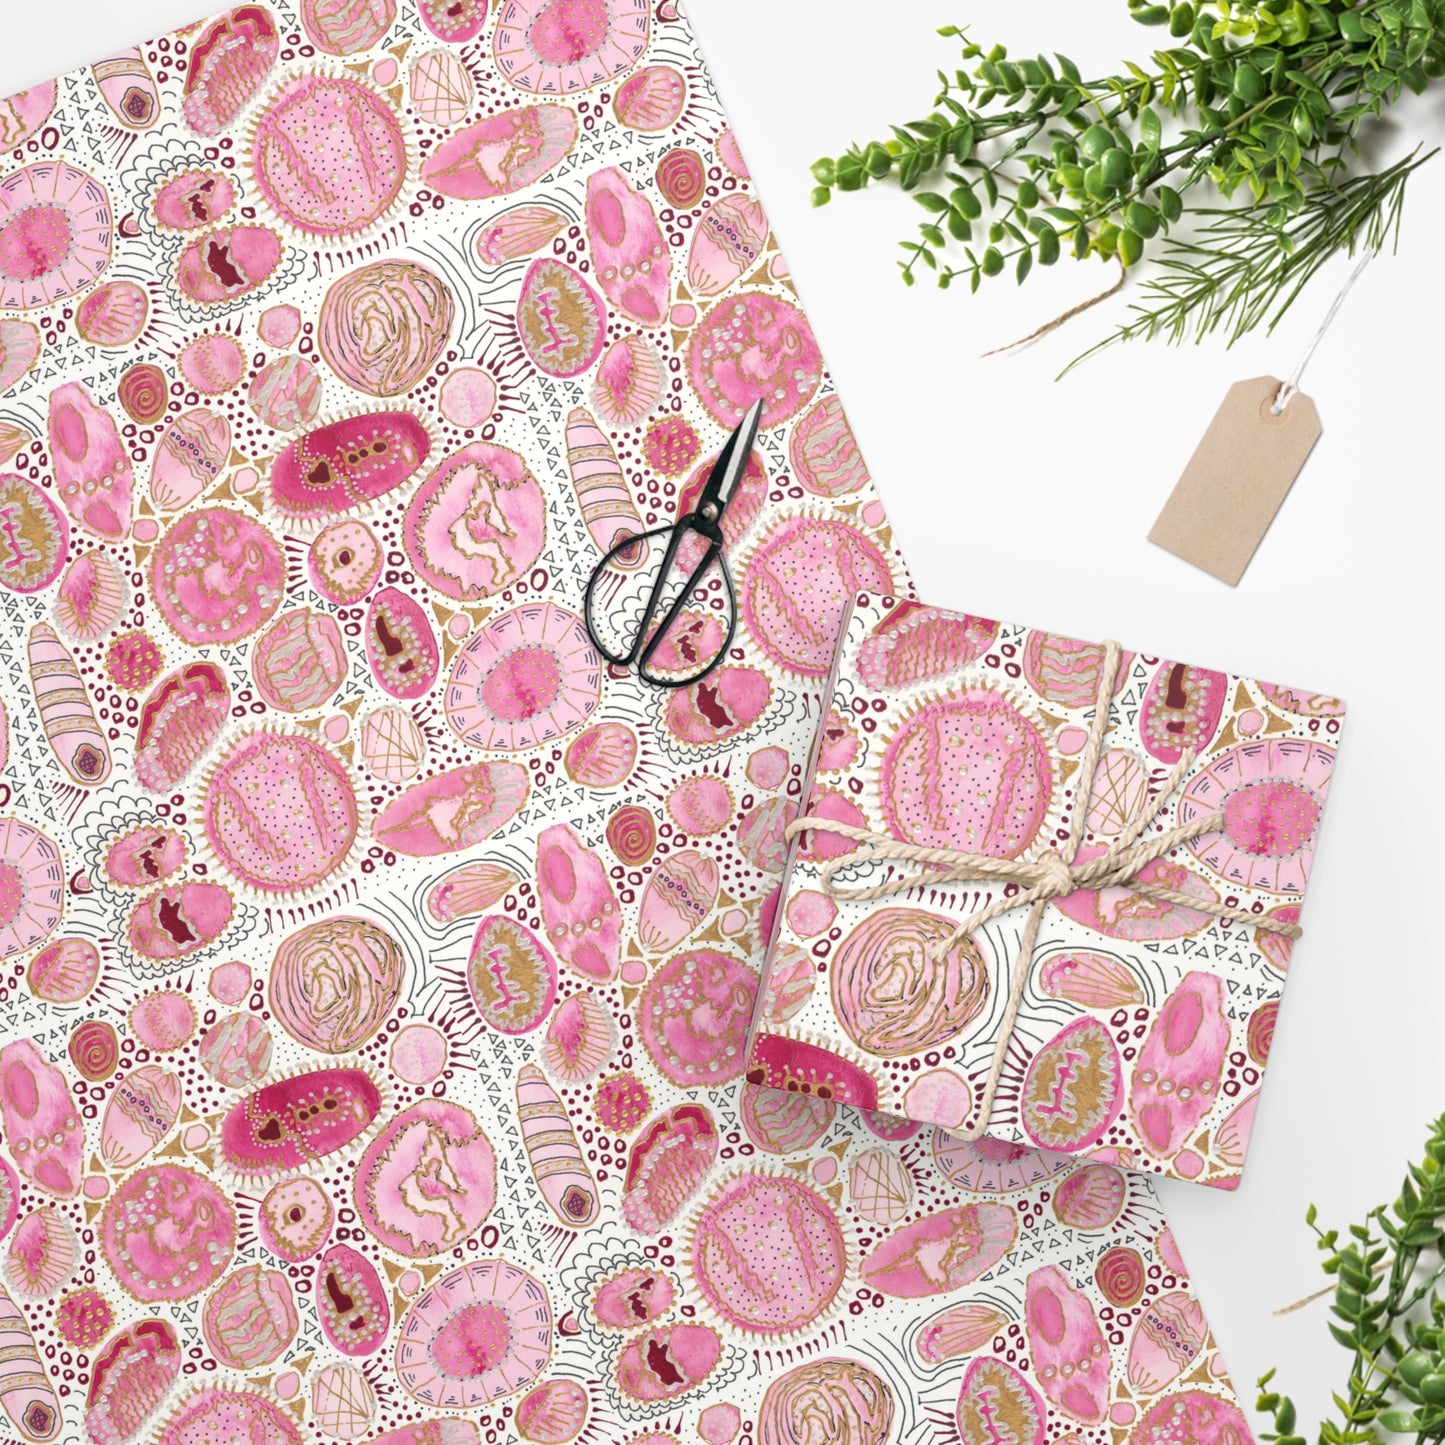 Wrapping Paper - "Pink Bliss Bubbles"